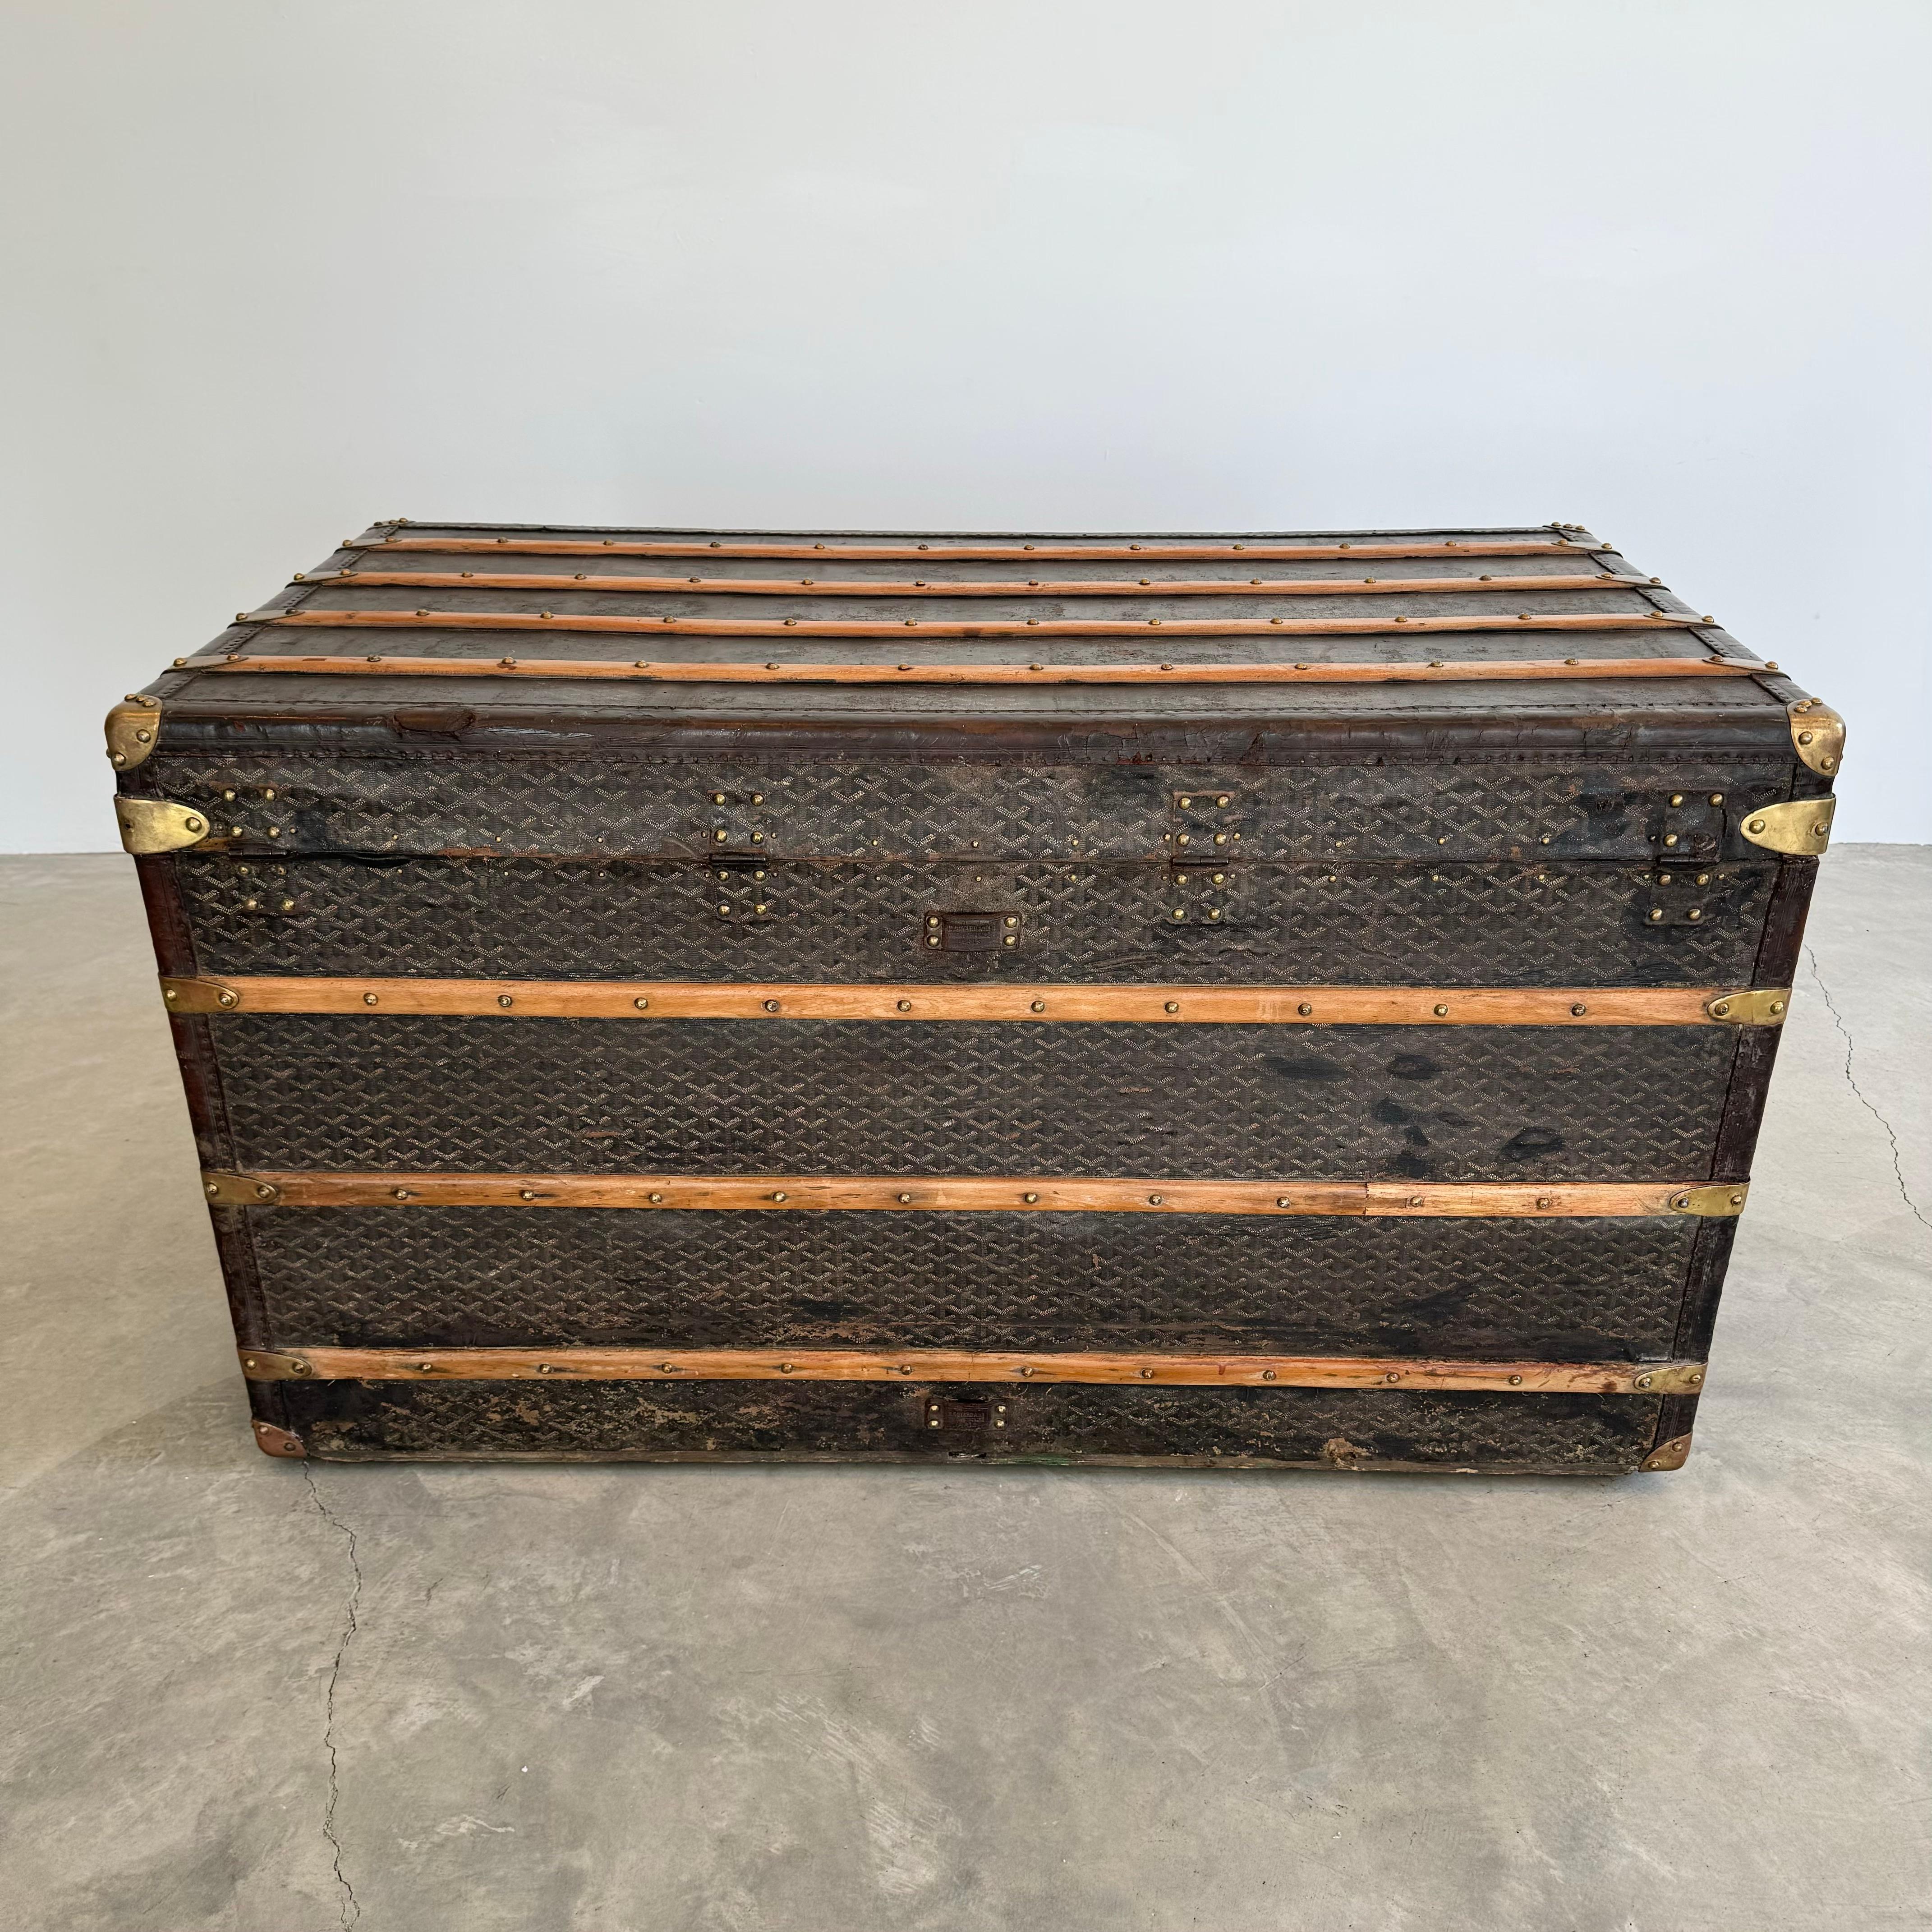 Astounding vintage Goyard trunk in a rare extra large size. The oldest and largest antique Goyard trunk available for sale anywhere. Completely original leather, canvas and brass, unrestored.Circa 1910, and just over 4 feet wide. Large wooden frame